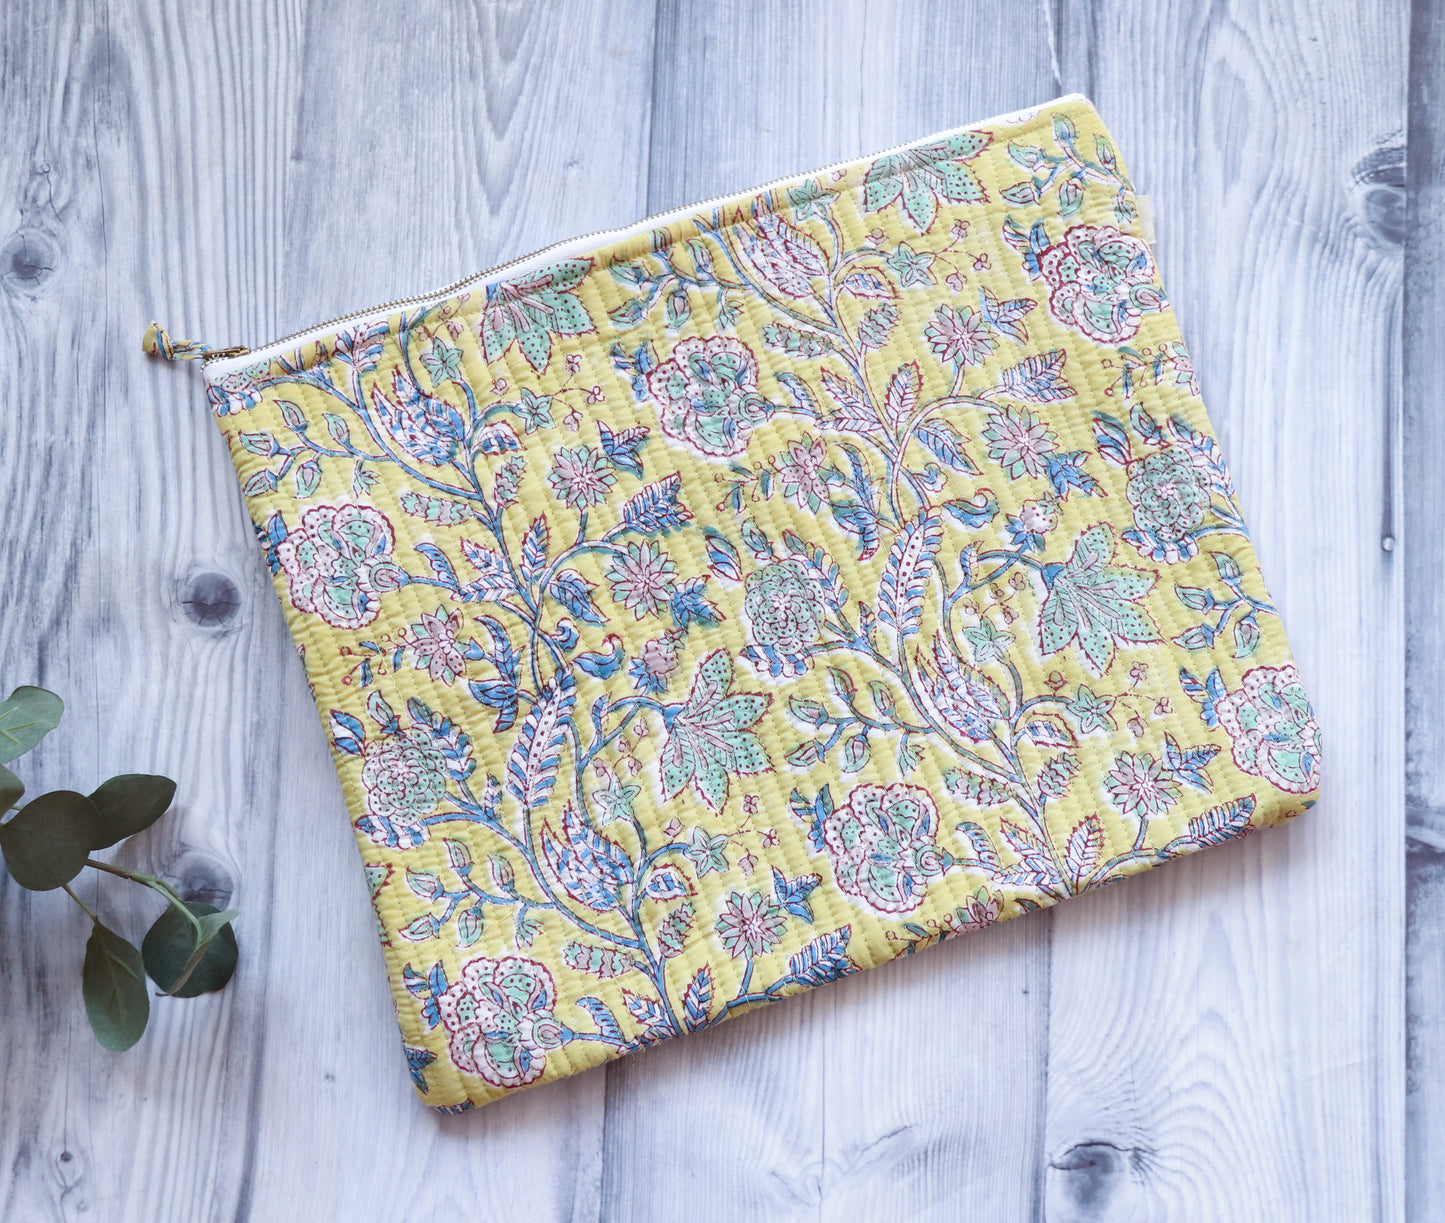 Block print Laptop sleeves - Laptop cover - Green floral - 13 inch, 14 inch & 15 inch